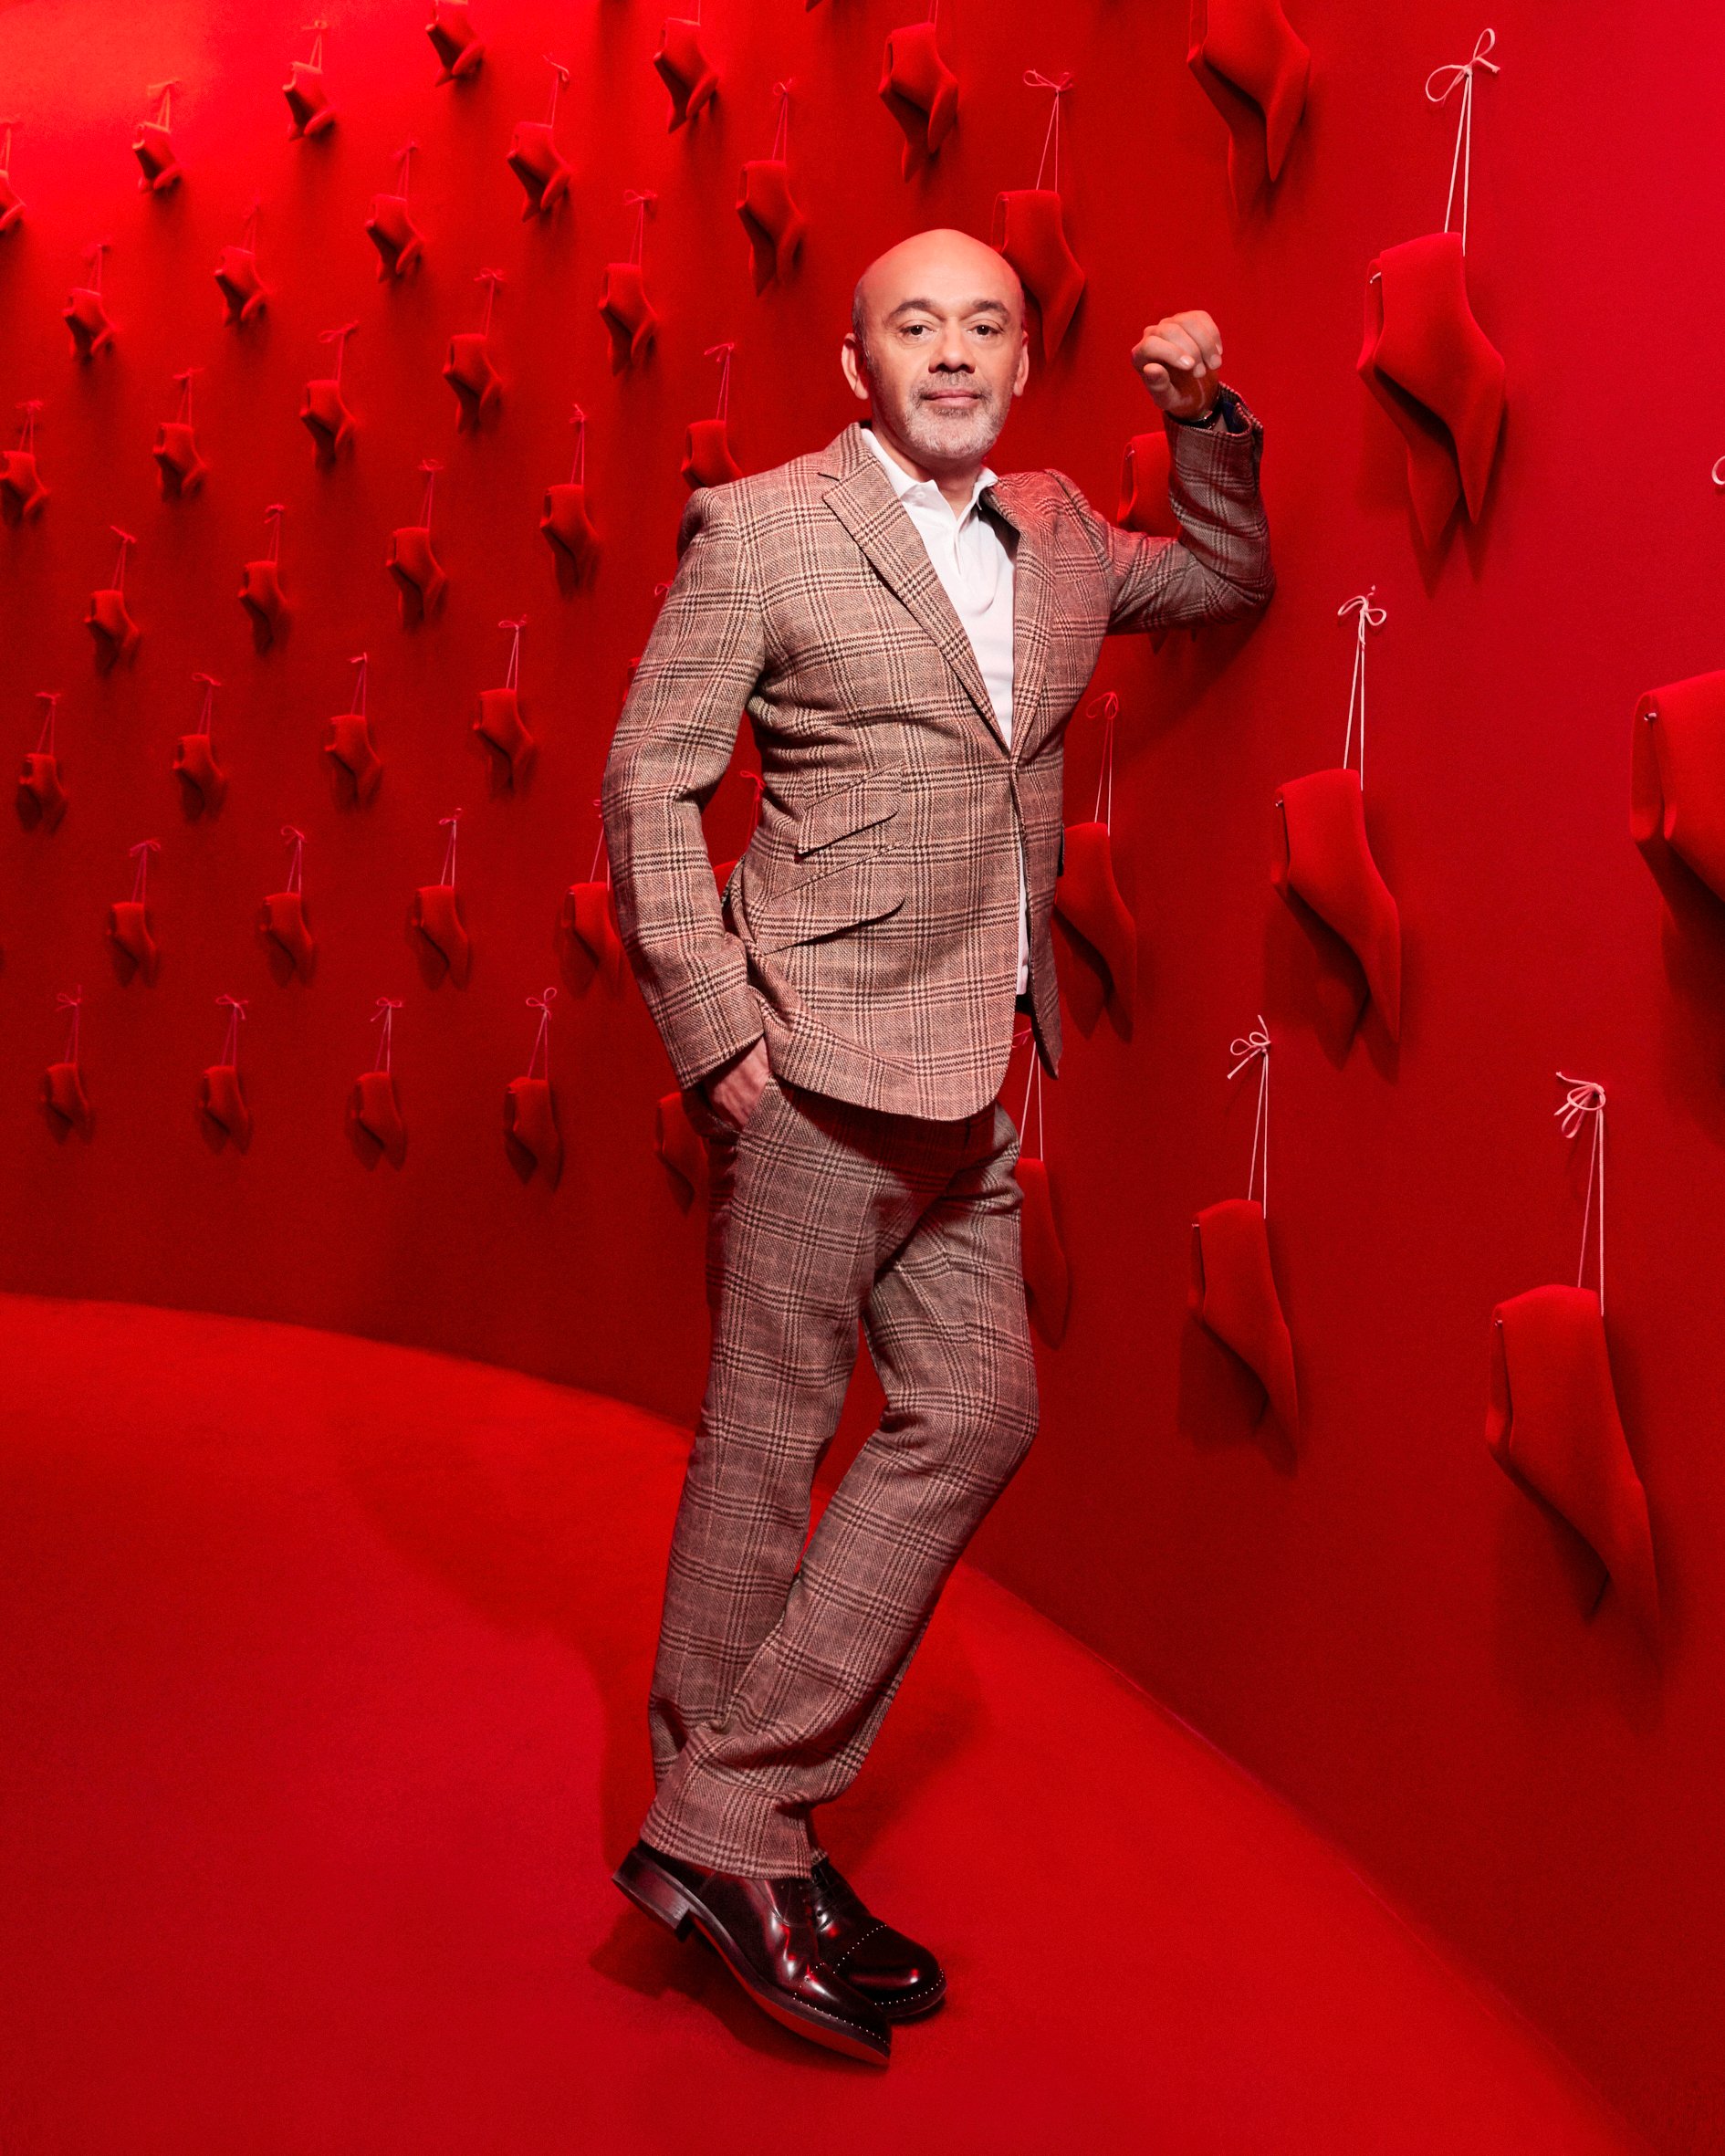 Designer Christian Louboutin on Warhol Inspired His First Red-Soled Heel and Why Himself an 'Applied Artist'